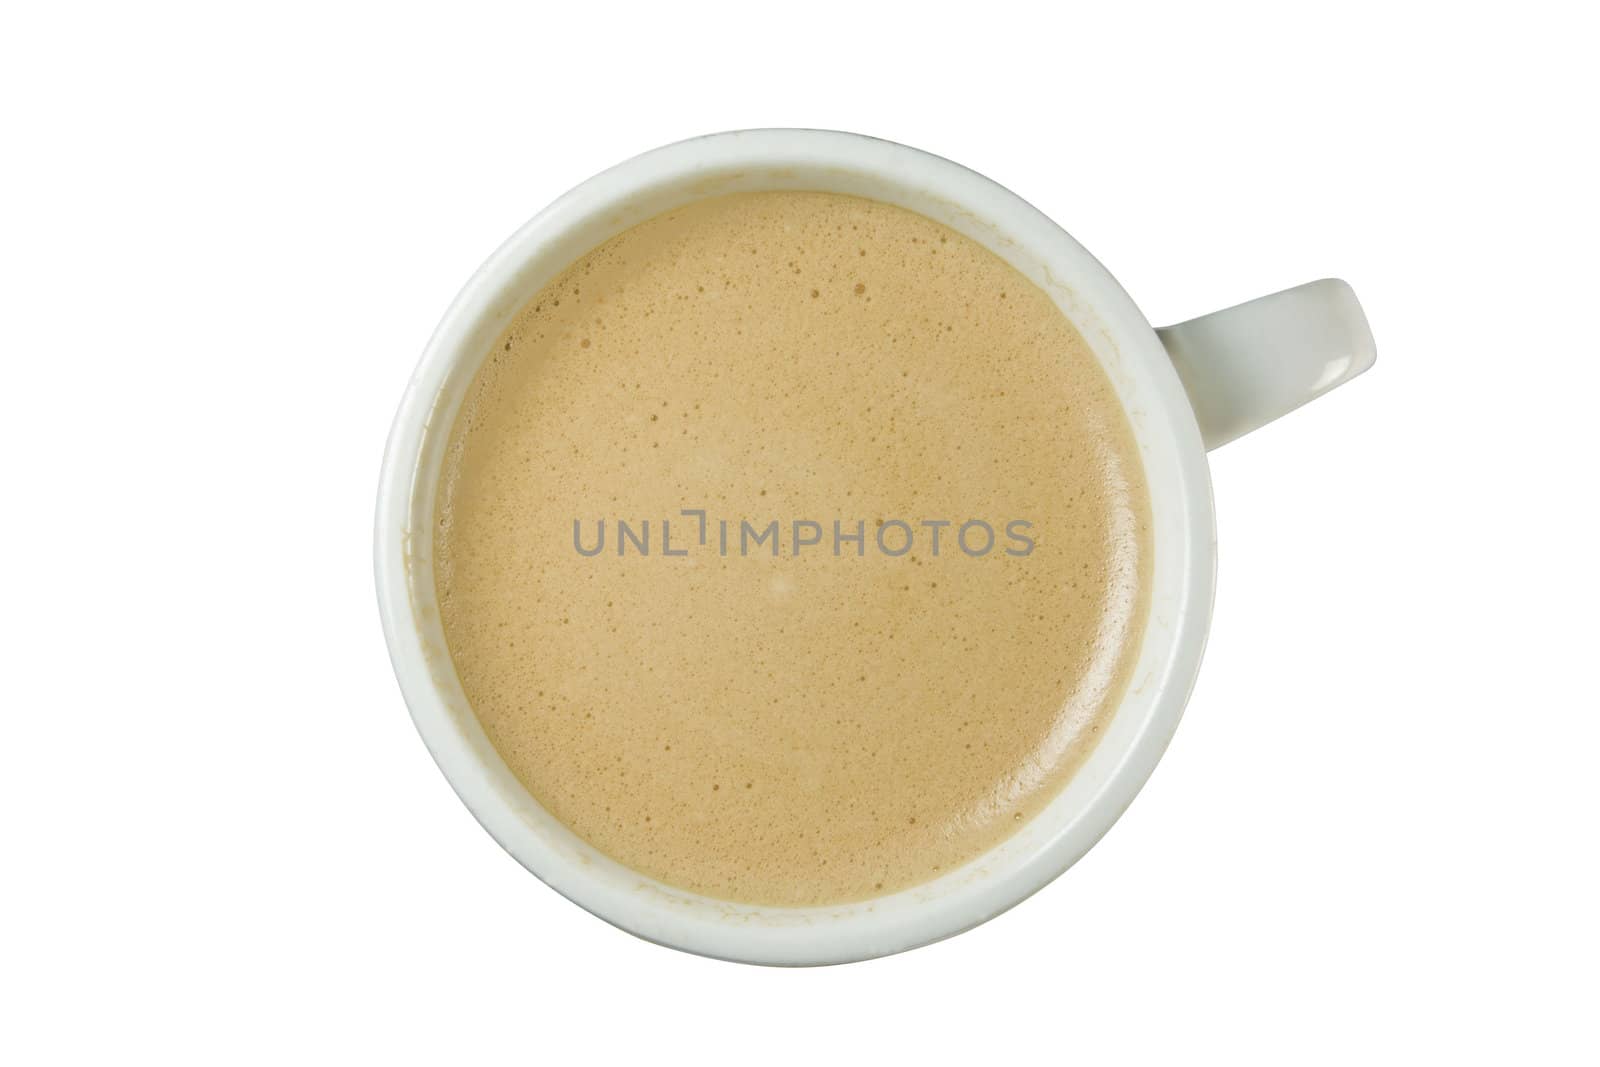 Classical cup of just brewed coffee. Fresh foam indicates that coffee was just brewed. Isolated on white.